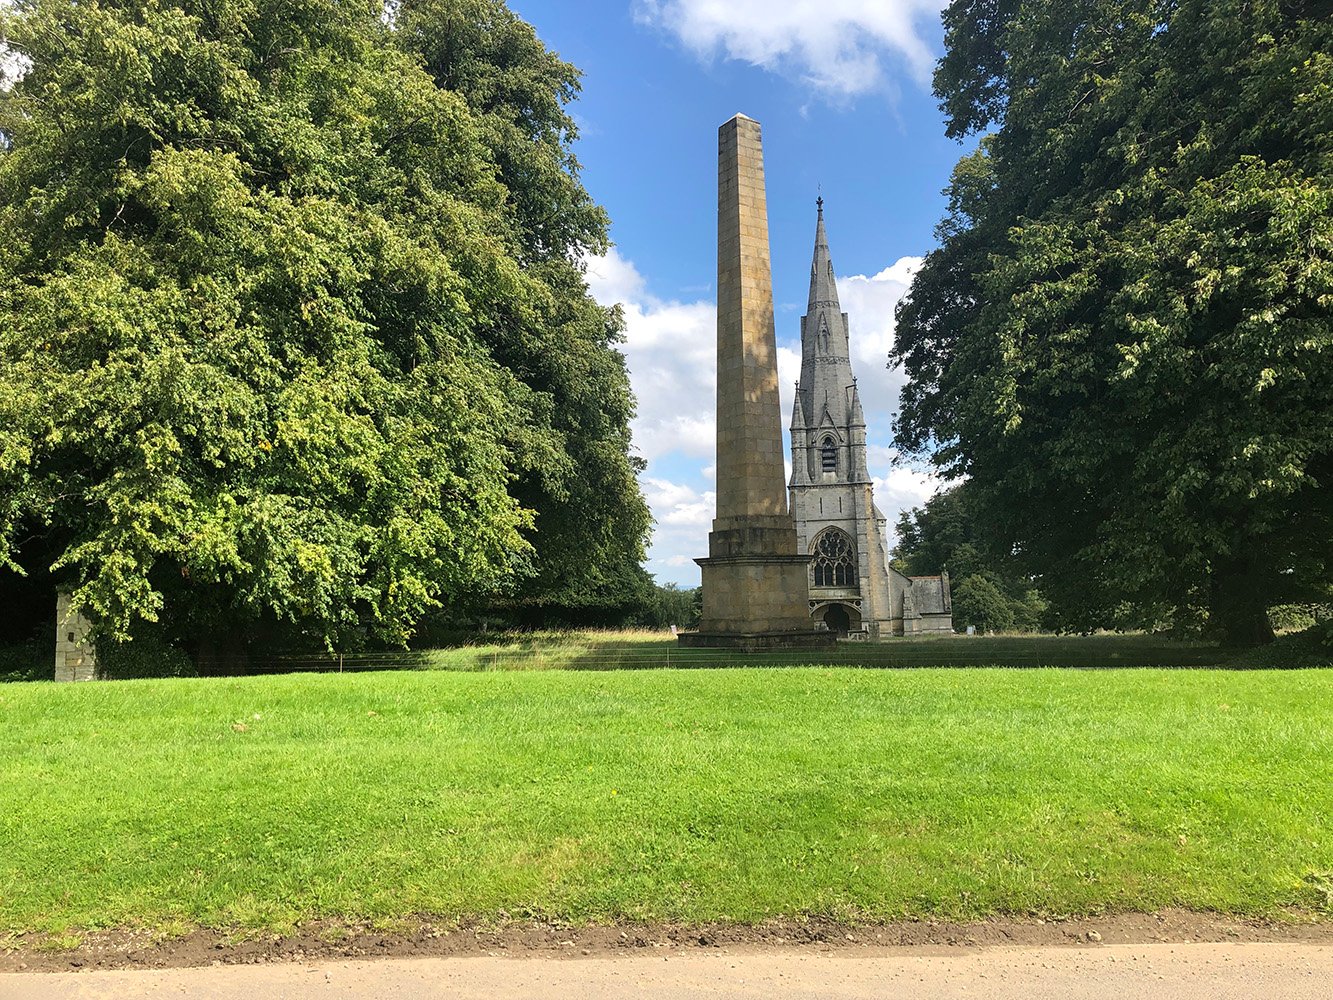 Image name obelisk and church studley royal fountains abbey north yorkshire the 3 image from the post A look at the history of Studley Royal, North Yorkshire, with Dr Emma Wells in Yorkshire.com.